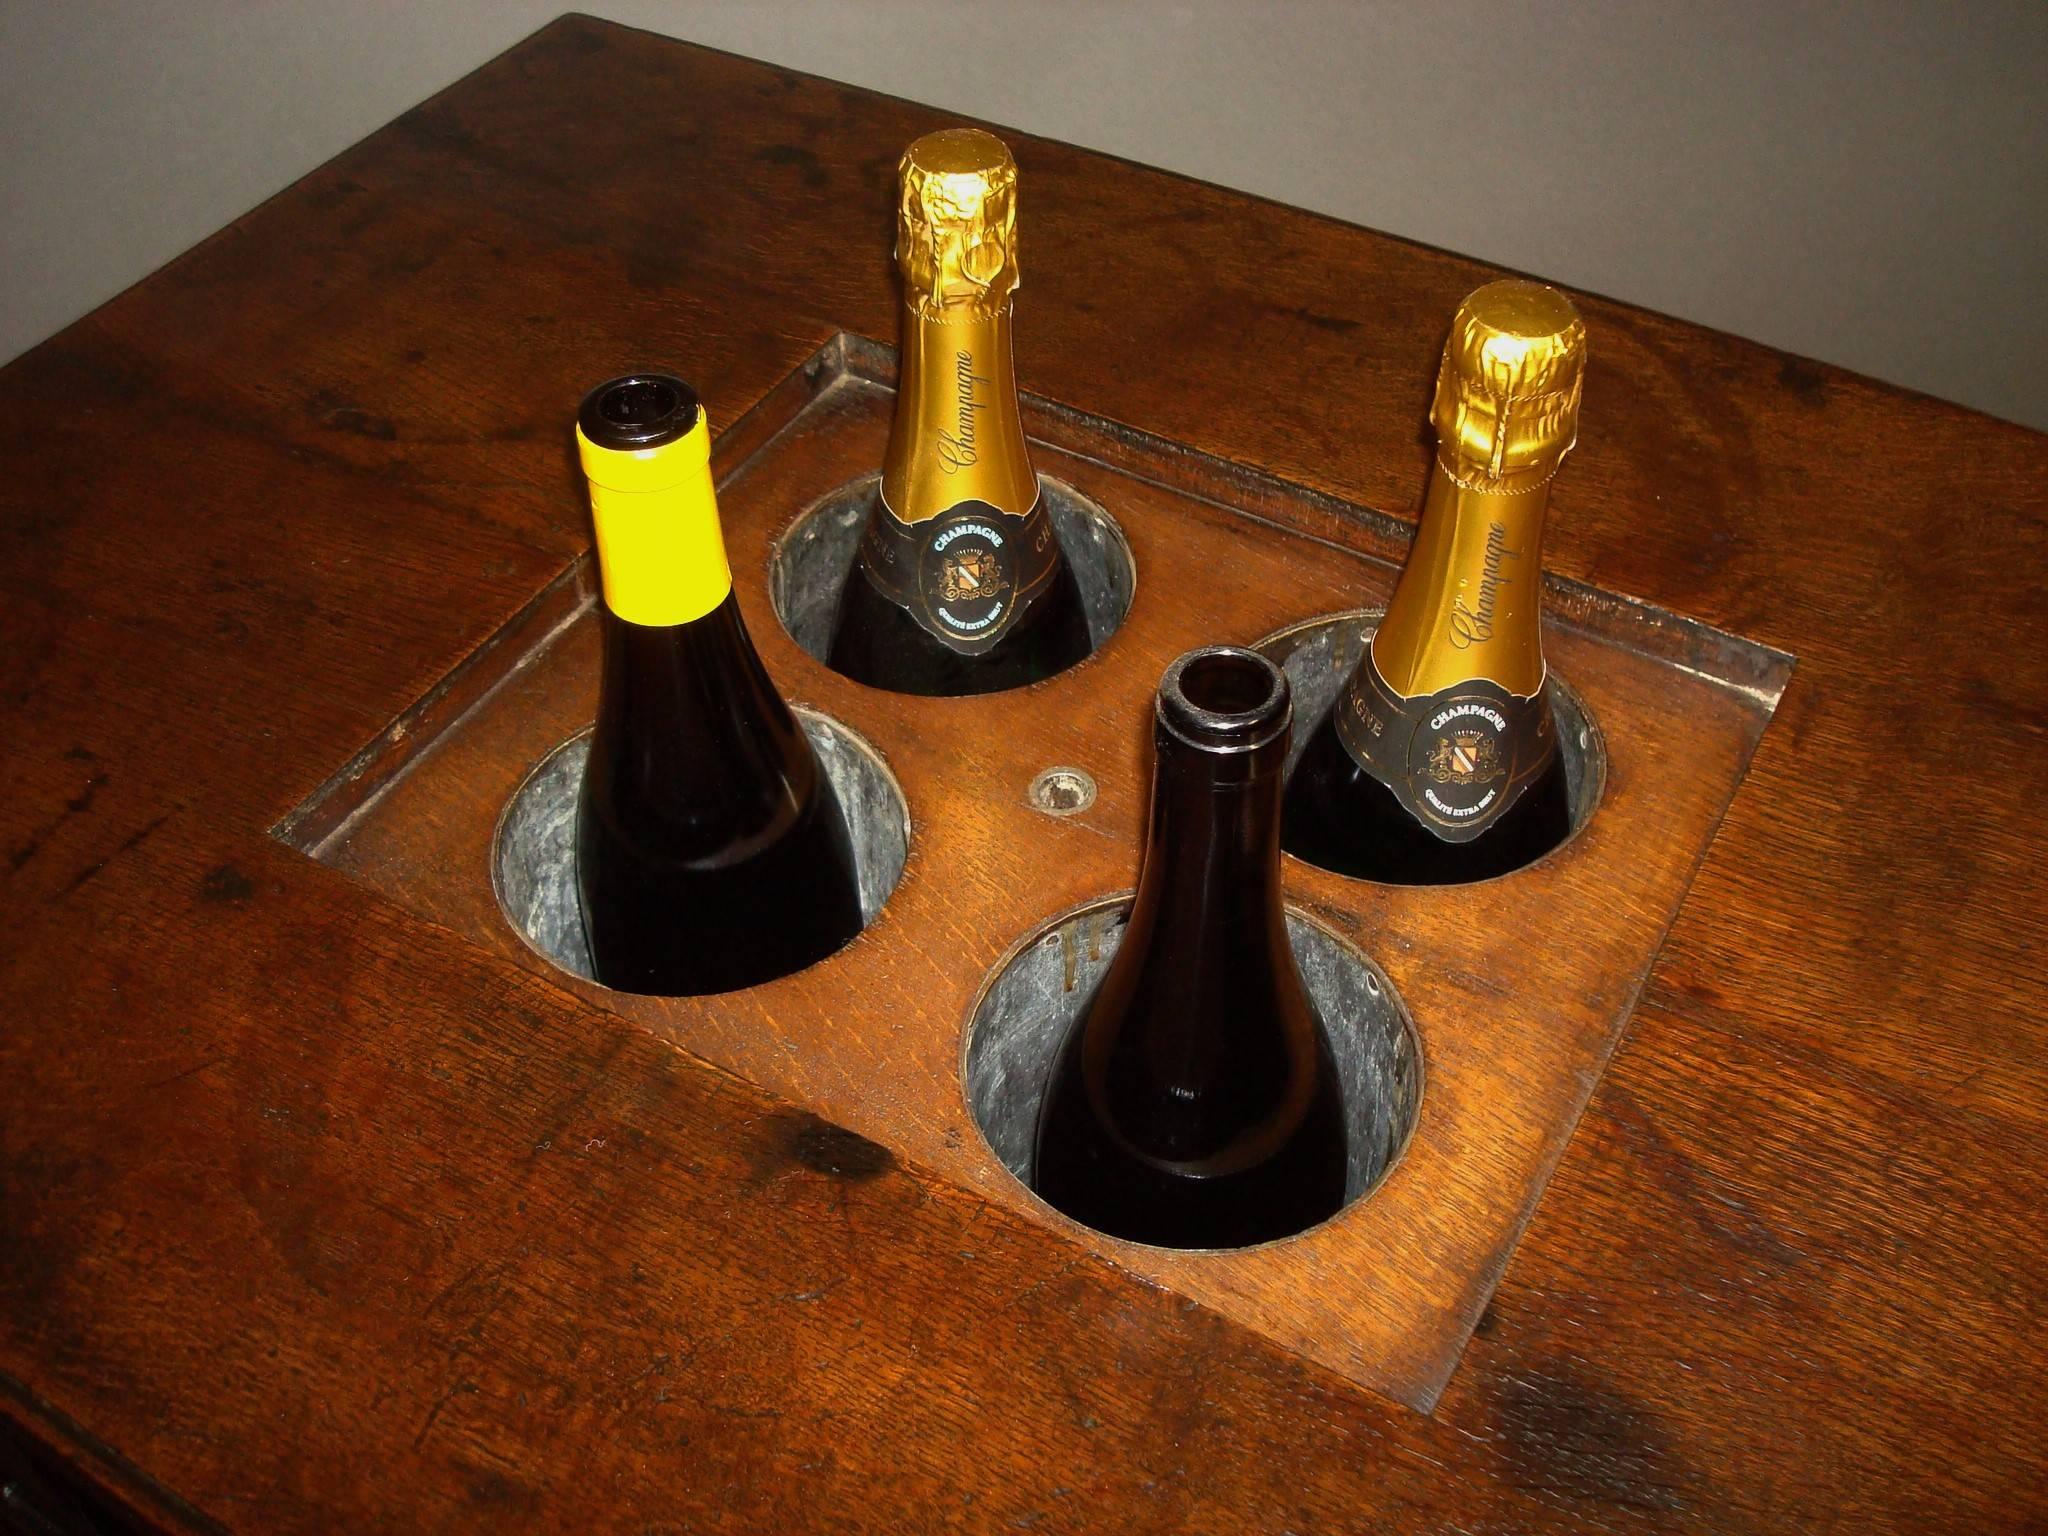 19th Century Gothic Oak Champagne or Wine Cooler Table In Excellent Condition For Sale In Moreton-in-Marsh, Gloucestershire